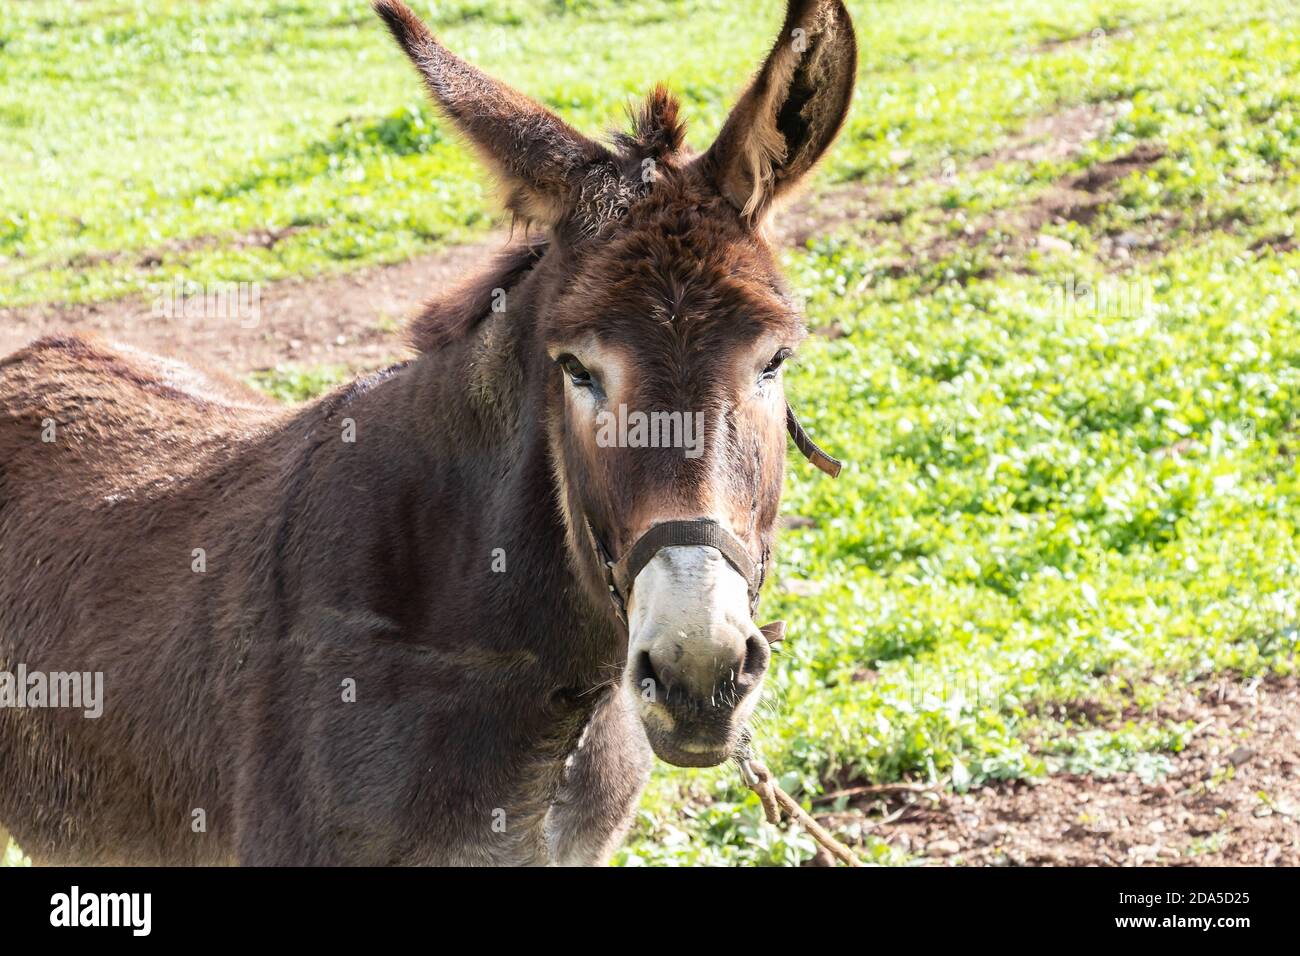 A Mule standing with nature background Stock Photo